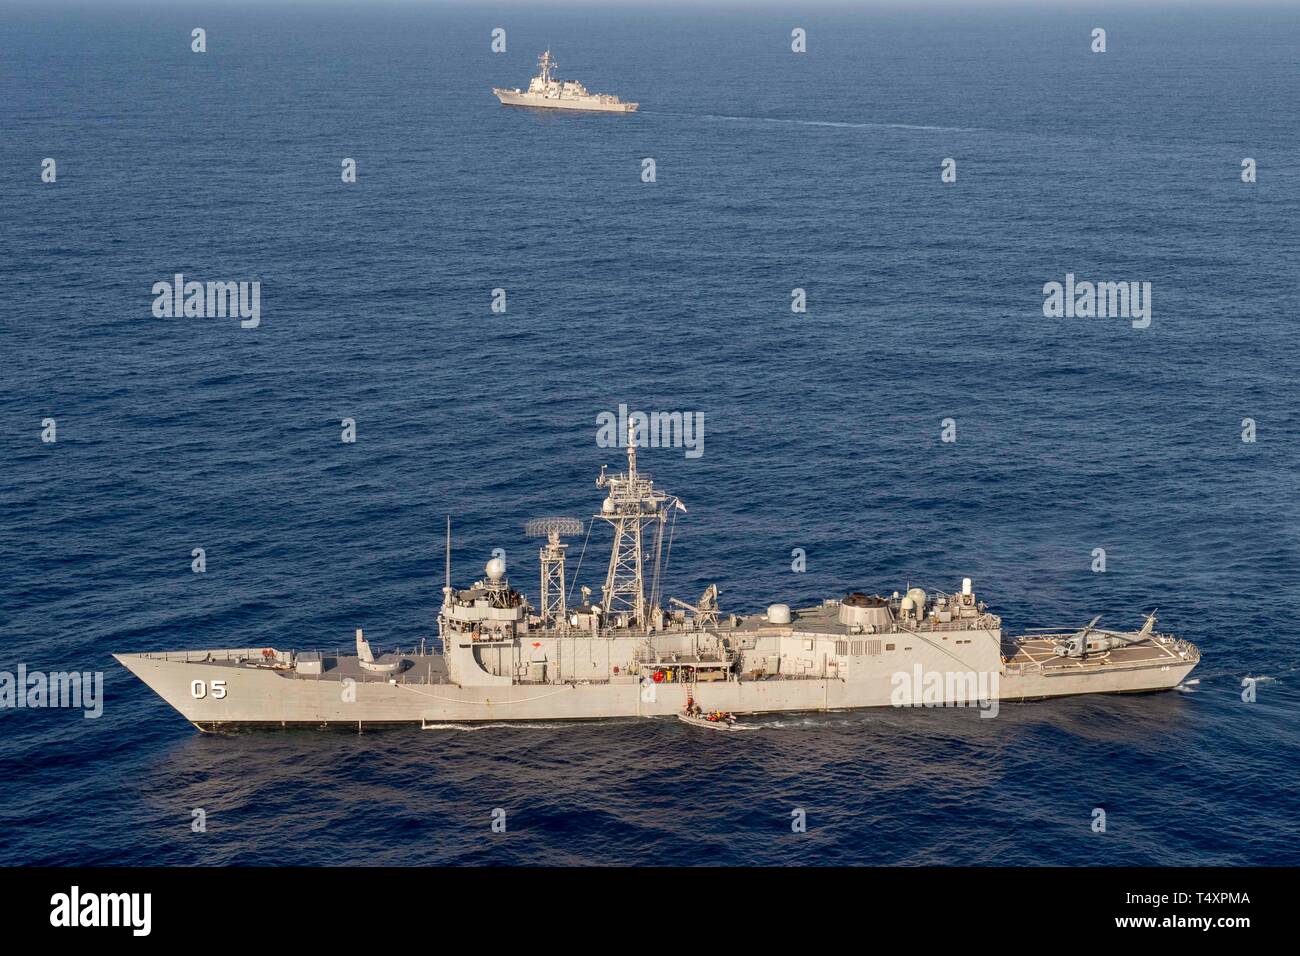 190418-N-UI104-0759     PHILIPPINE SEA (April 18, 2019) Sailors assigned to the Arleigh Burke-class guided-missile destroyer USS Preble (DDG 88) and the Royal Australian Navy Adelaide-class guided-missile frigate HMAS Melbourne (FFG 05) practice Visit Board Search and Seizer (VBSS) on each other’s vessels during a cooperative deployment. Preble and Melbourne are participating in a cooperative deployment in order to improve on maritime capabilities between partners.  Preble is deployed to the U.S 7th Fleet area of operations in support of security and stability in the Indo-Pacific region. (U.S. Stock Photo